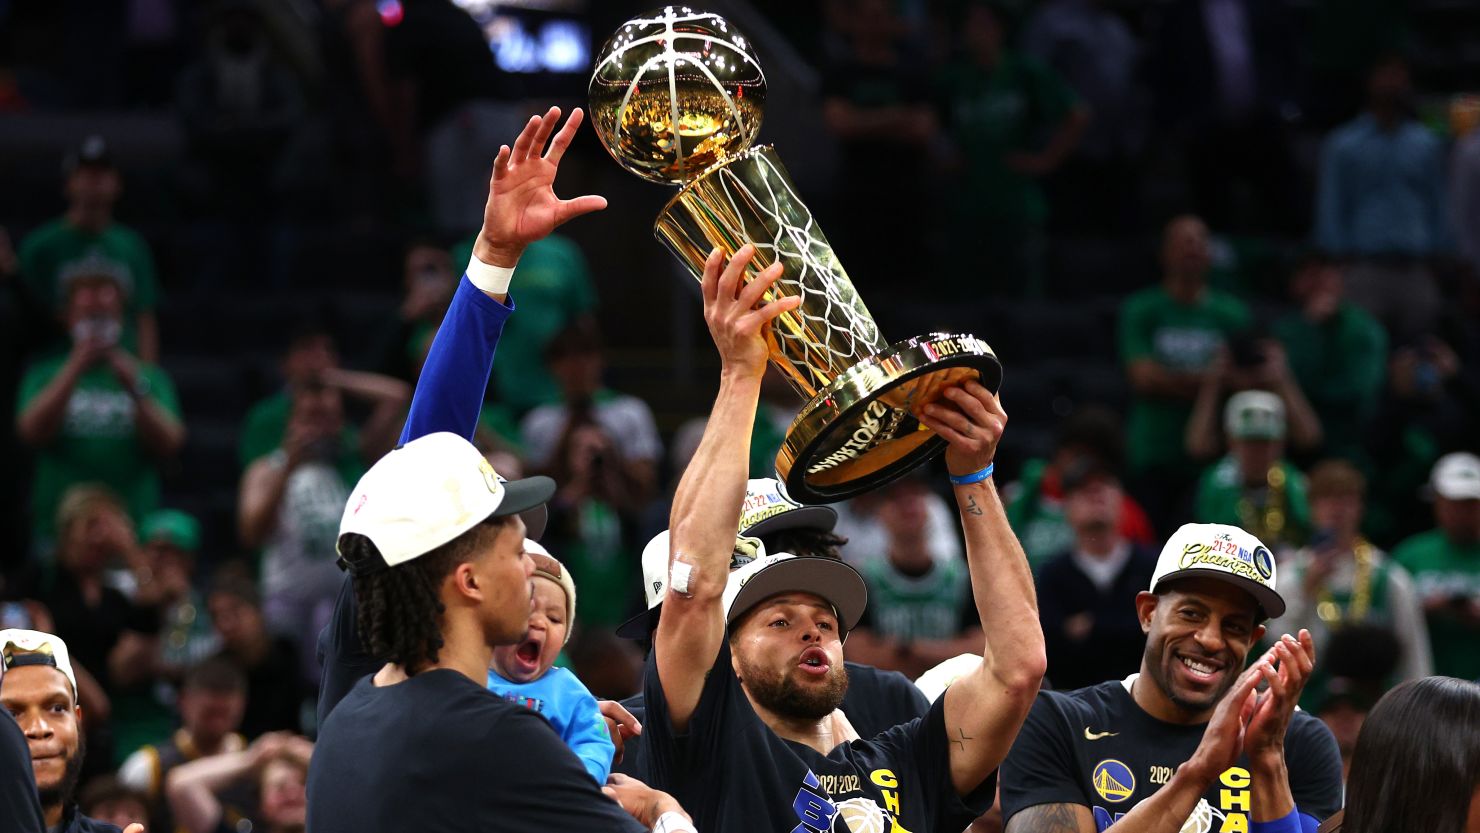 Stephen Curry of the Golden State Warriors raises the Larry O'Brien Championship Trophy after defeating the Celtics in Game 6 of the 2022 NBA Finals on June 16, 2022 in Boston. 